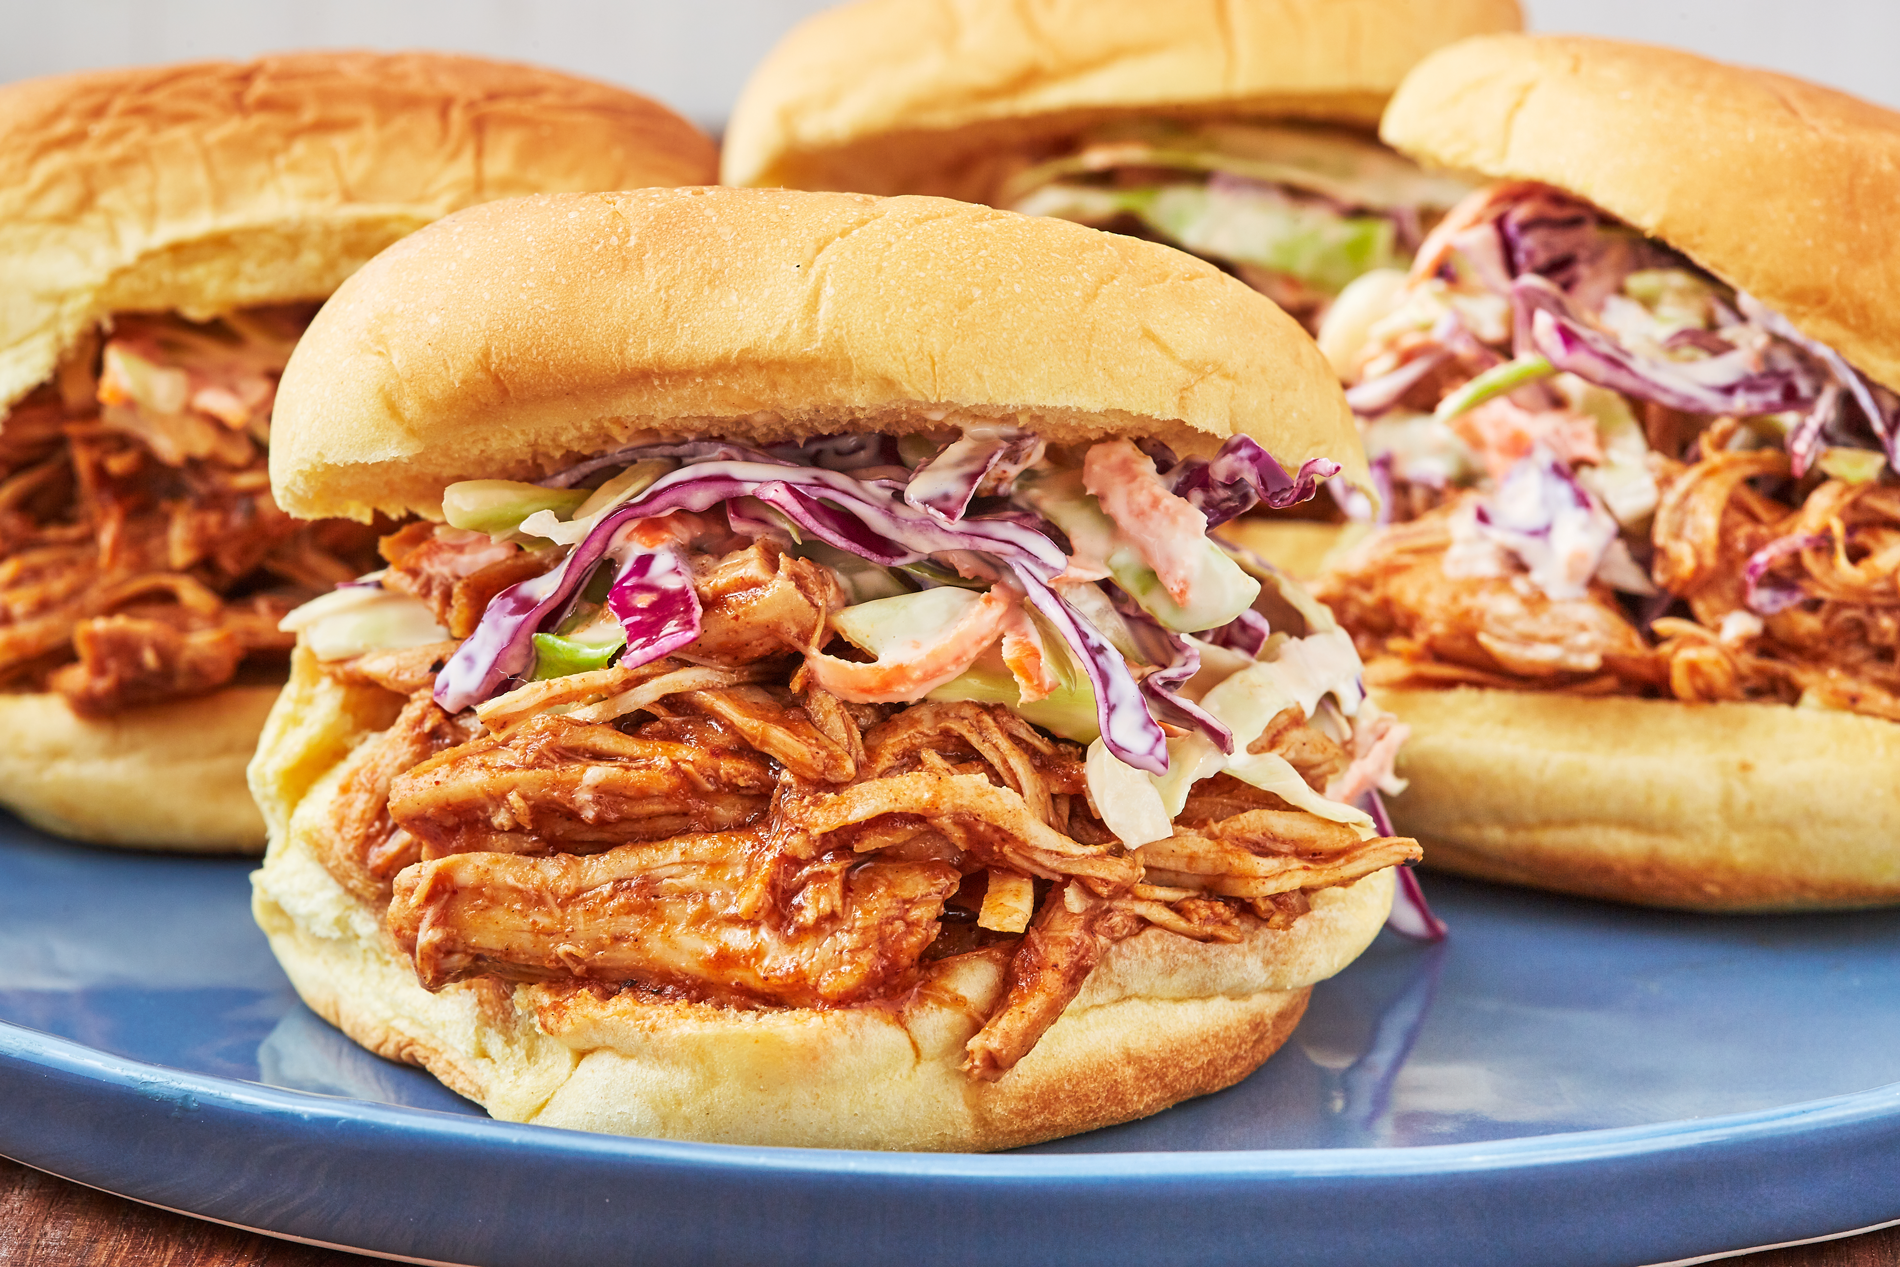 190510-slow-cooker-barbecue-chicken-sandwich-horizontal-1558386757